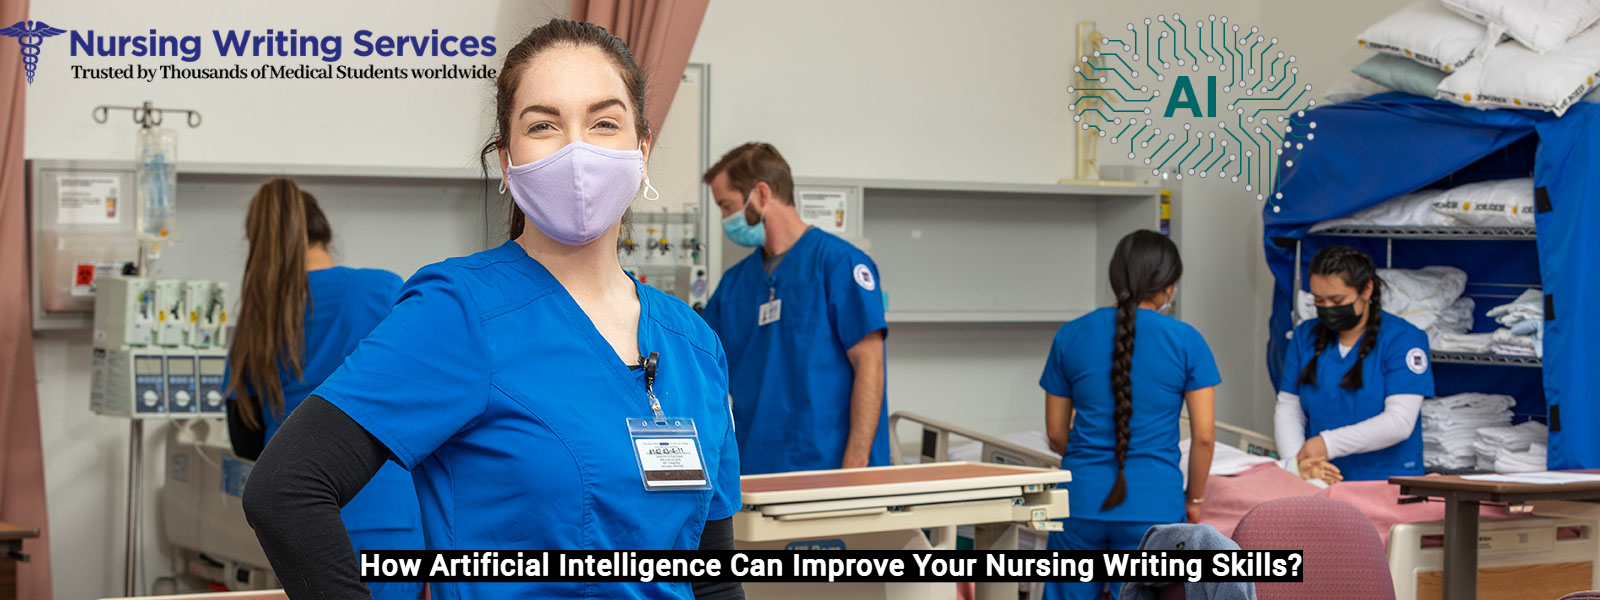 How Artificial Intelligence Can Improve Your Nursing Writing Skills